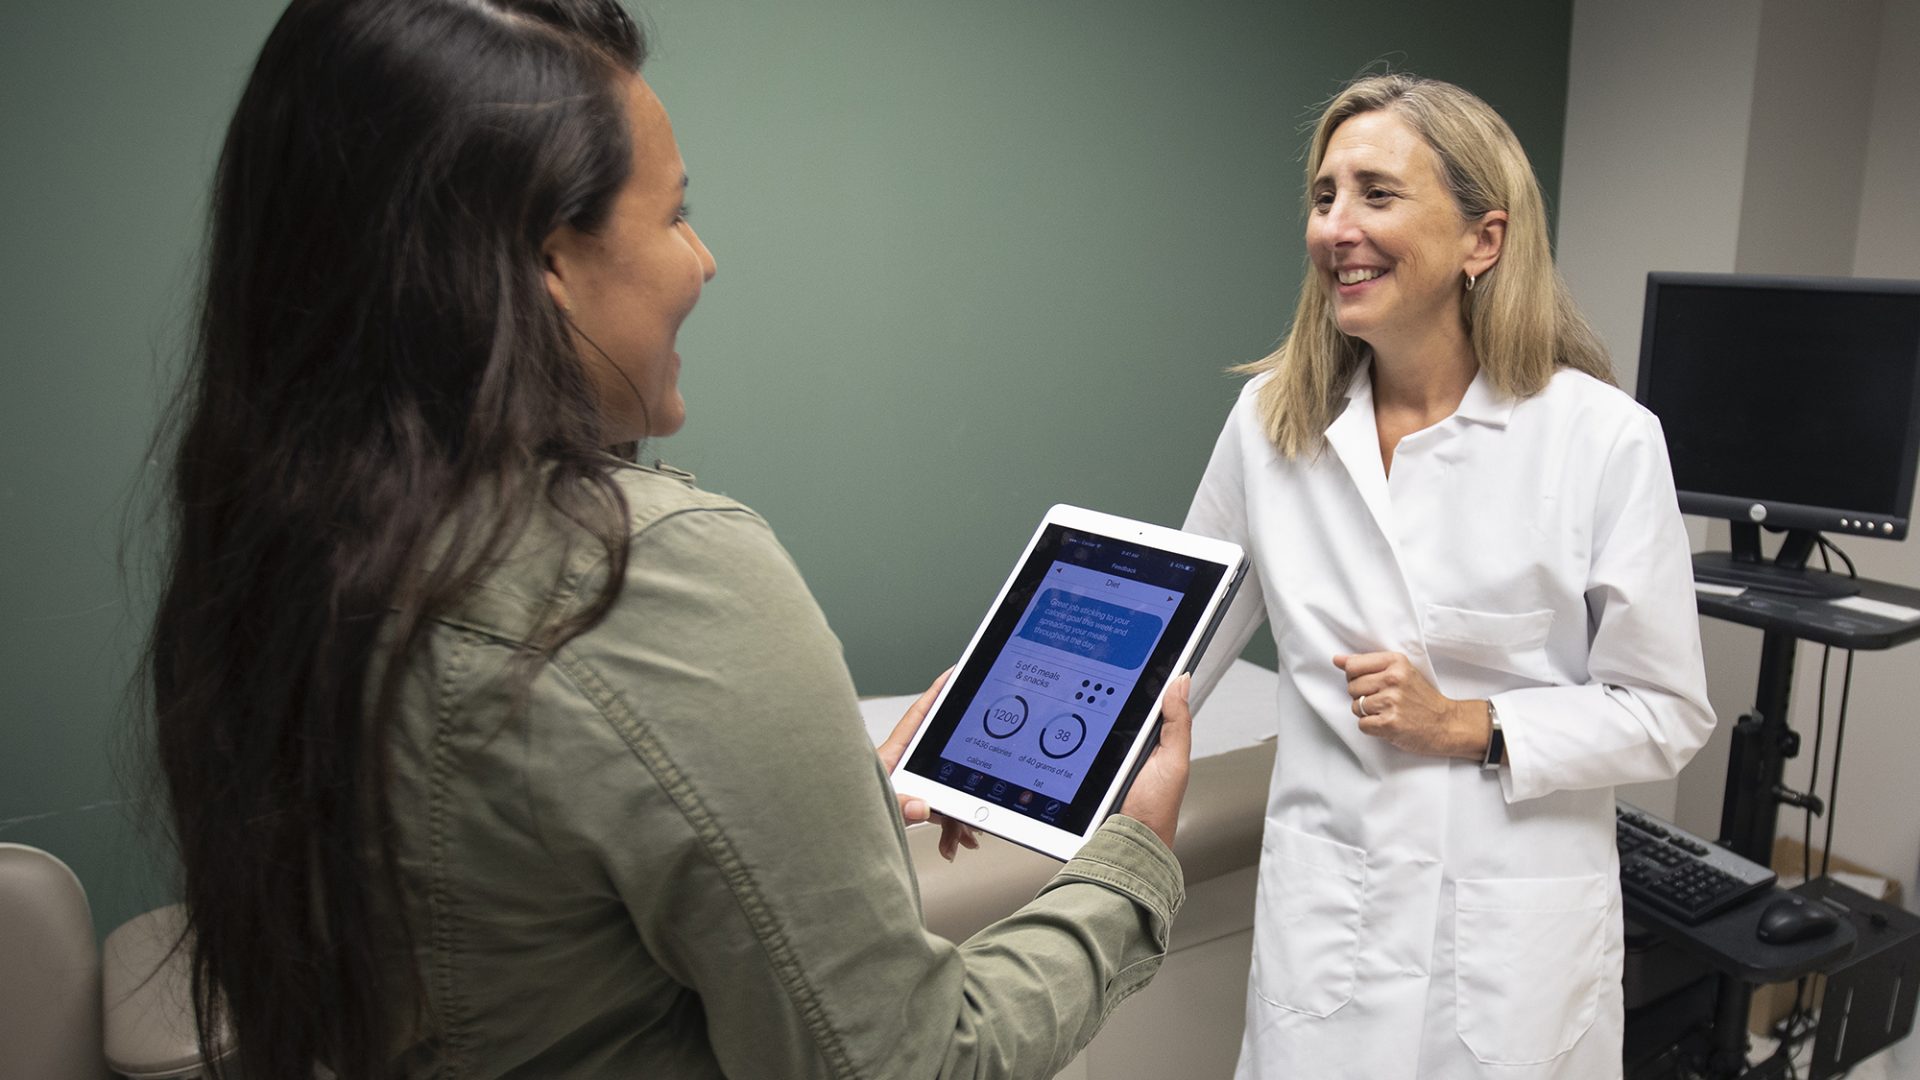 Deb Tate (right) speaks with a young woman holding an iPad with the mPWR app on it in an exam room.